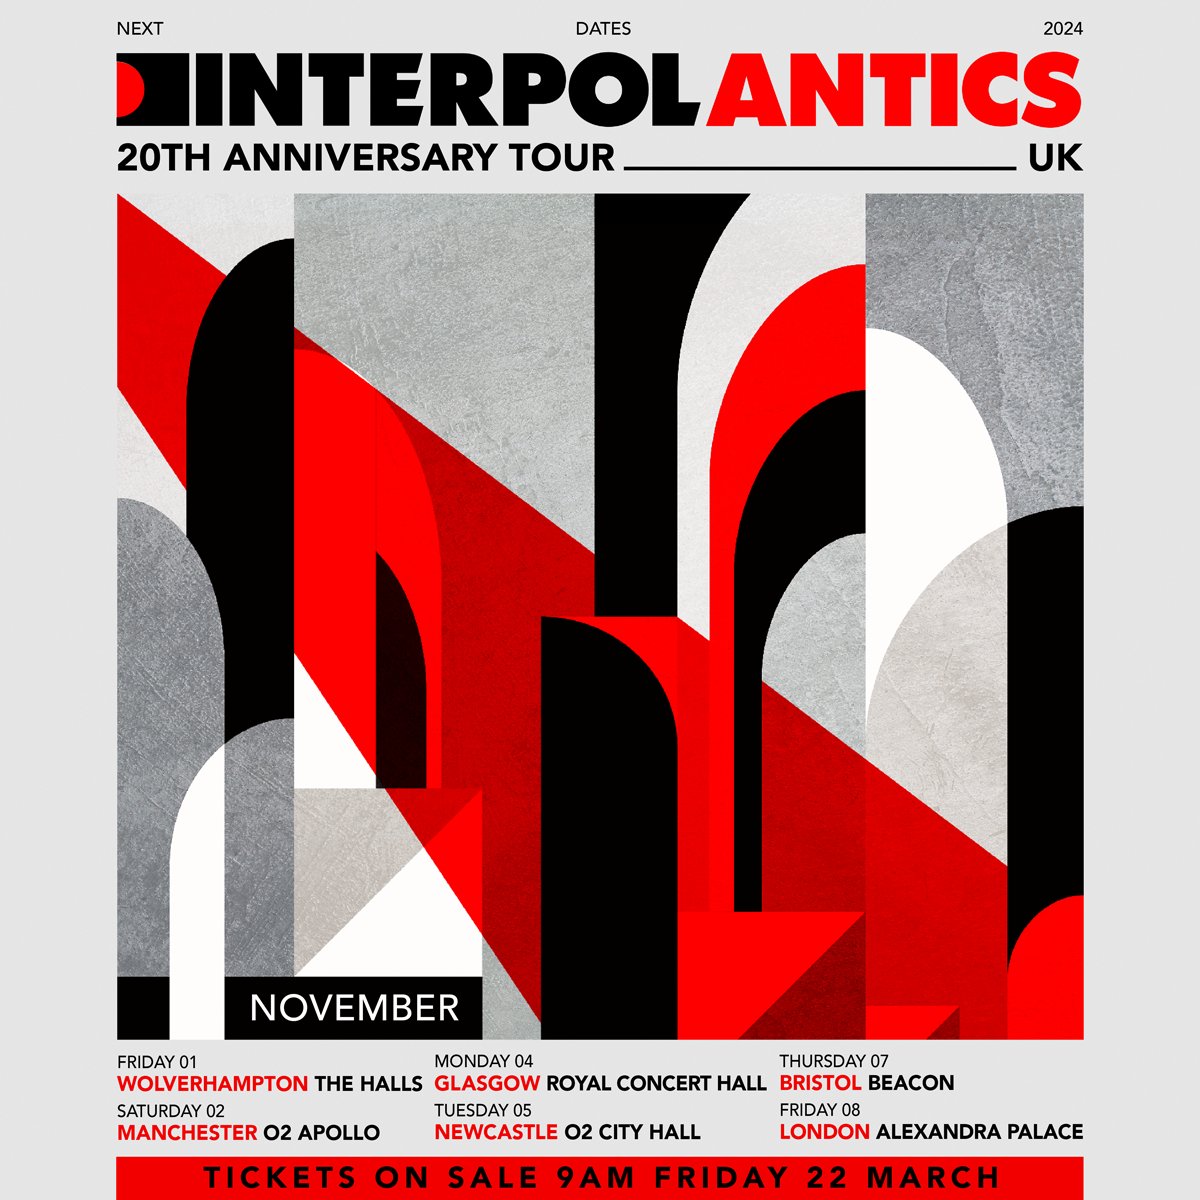 In celebration of the 20th anniversary of Antics, @Interpol have just announced a UK tour where they will play the album in full this November 2024!